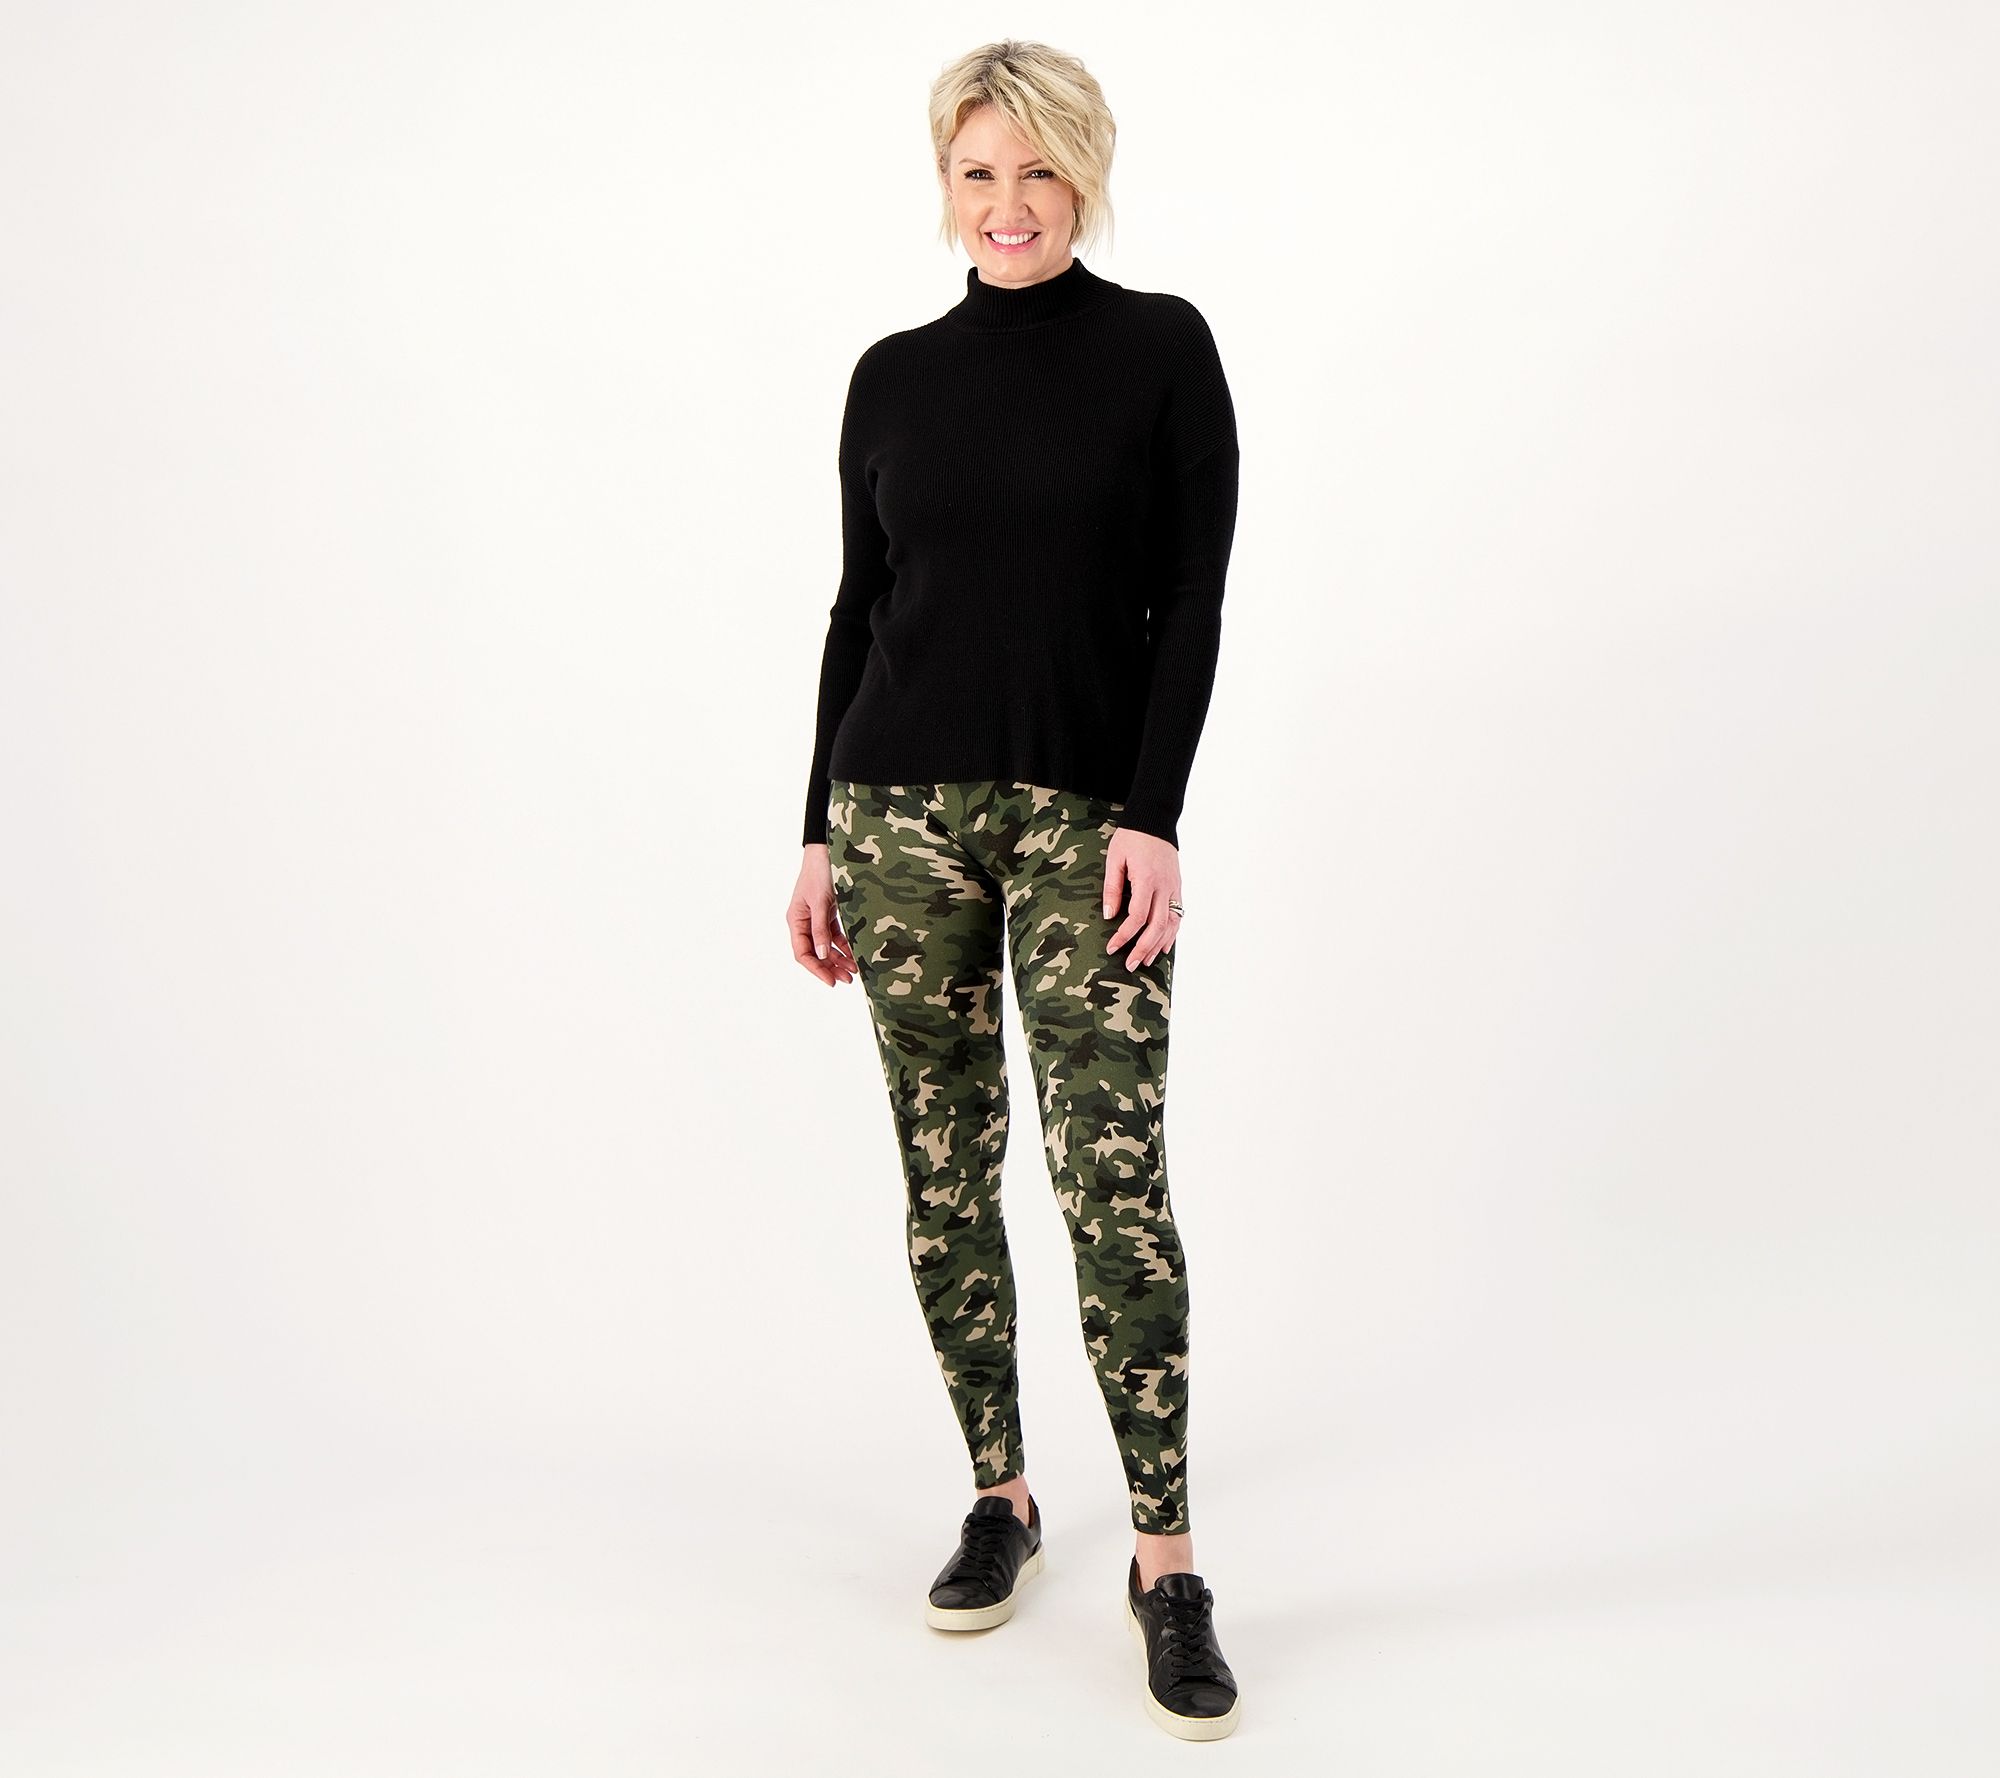 Legging Army - Check out our affiliate program, want to